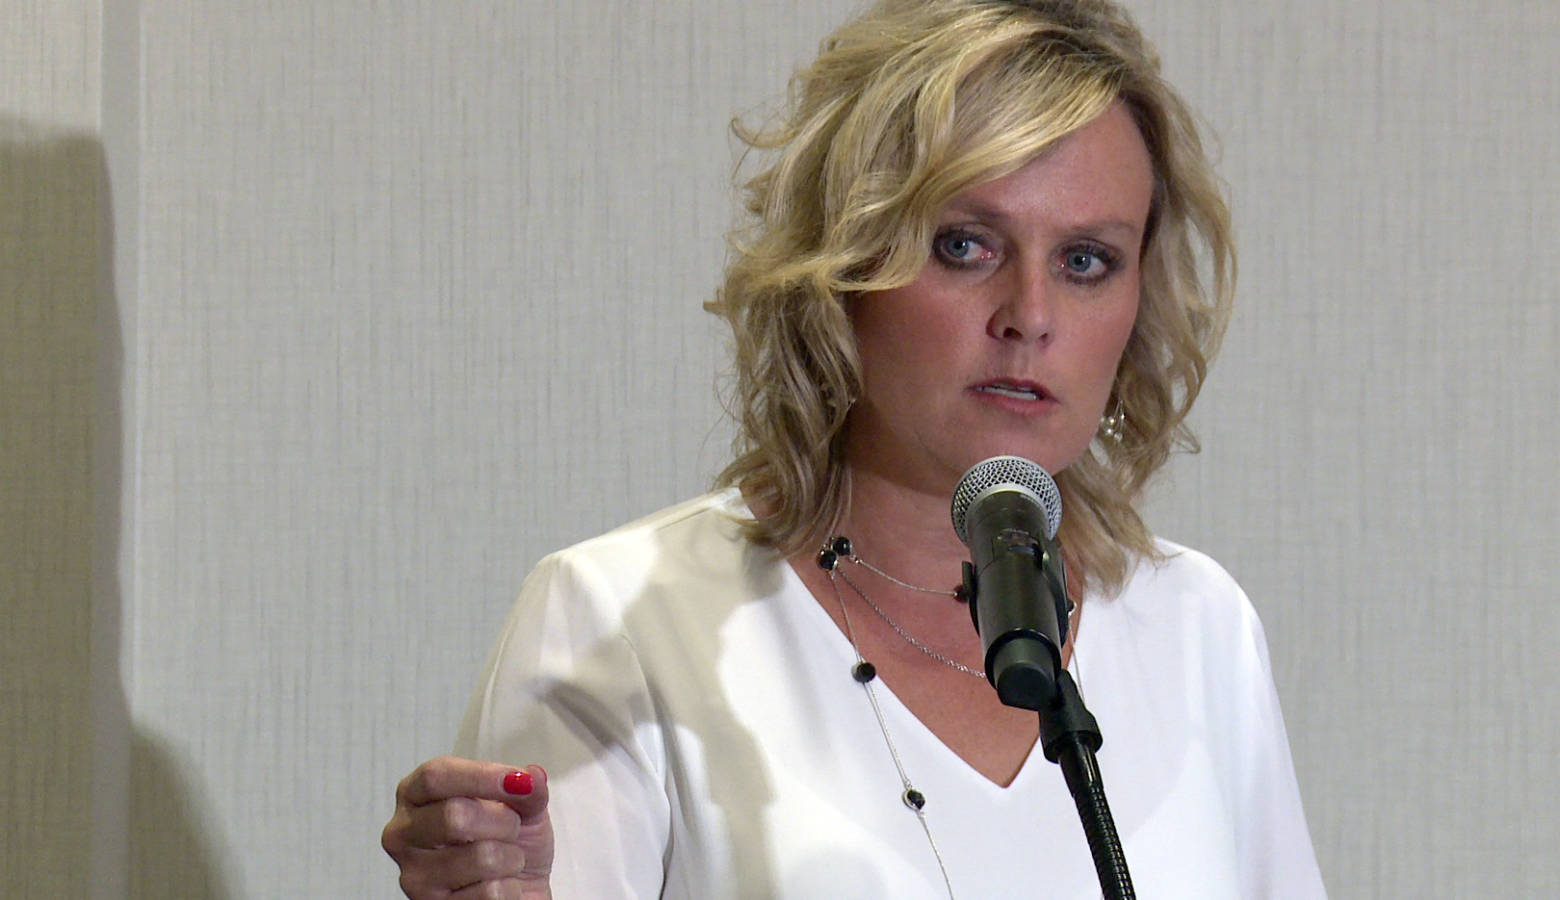 State Superintendent of Public Instruction Jennifer McCormick discusses school safety, following a roundtable Tuesday. (Lauren Chapman/IPB News)